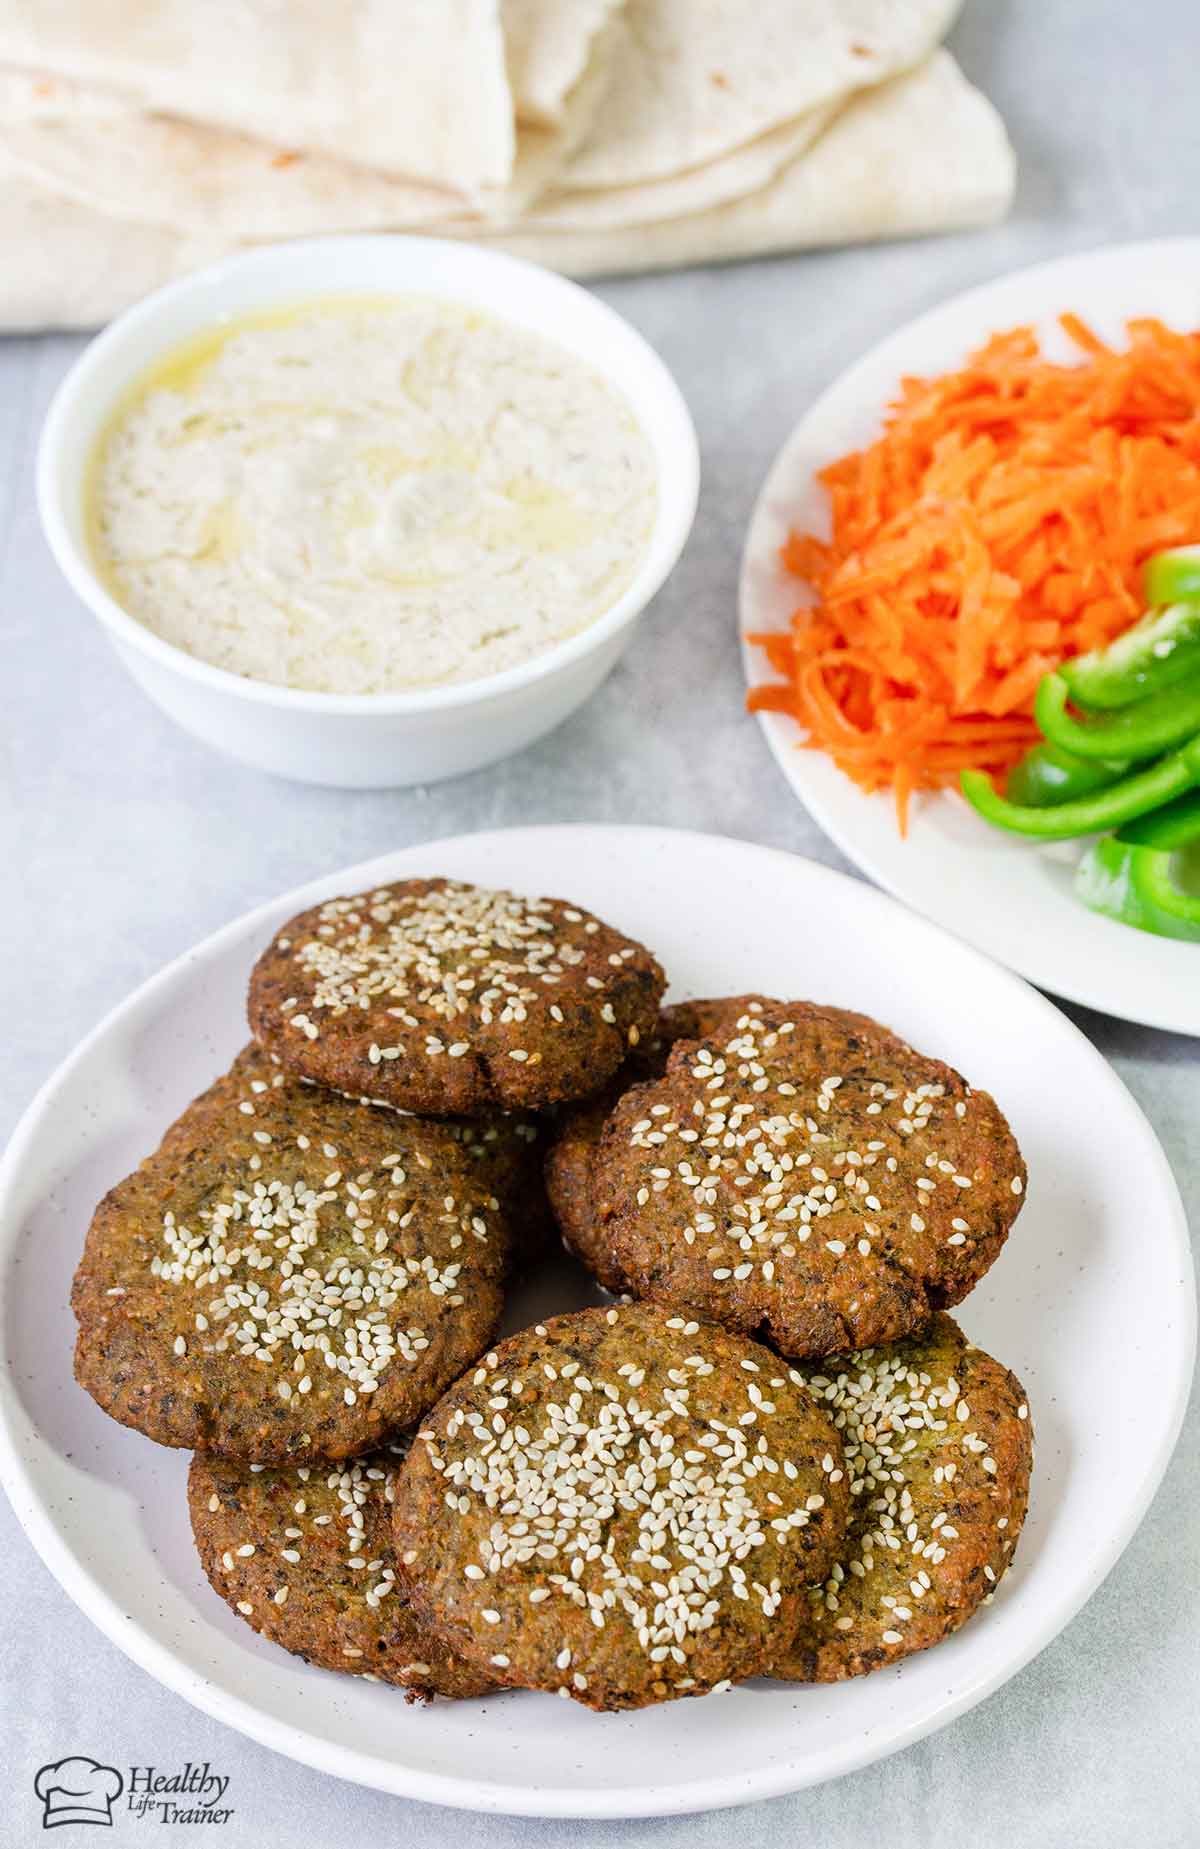 Lebanese Falafel in a plate and a bowl of tahini sauce.